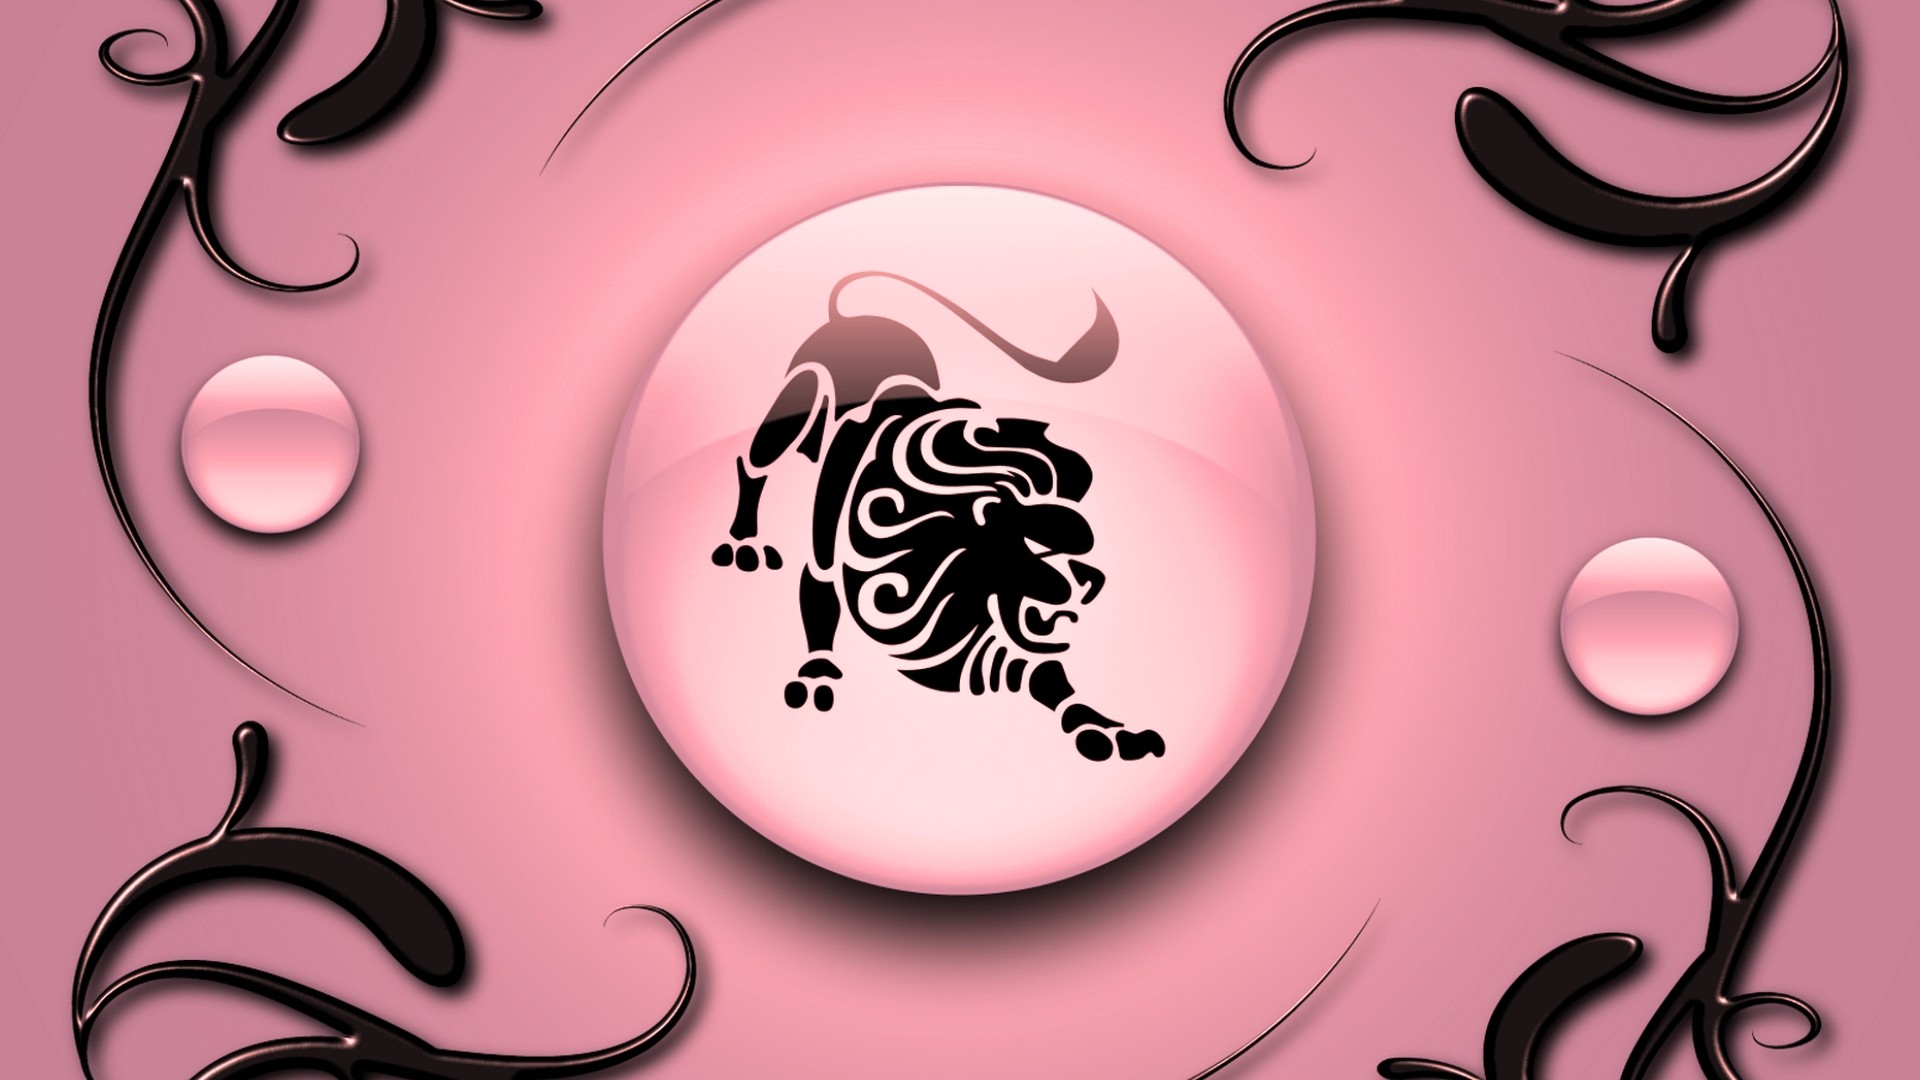 1920x1080 Leo on a pink background with black ornament wallpapers and images -  wallpapers, pictures, photos